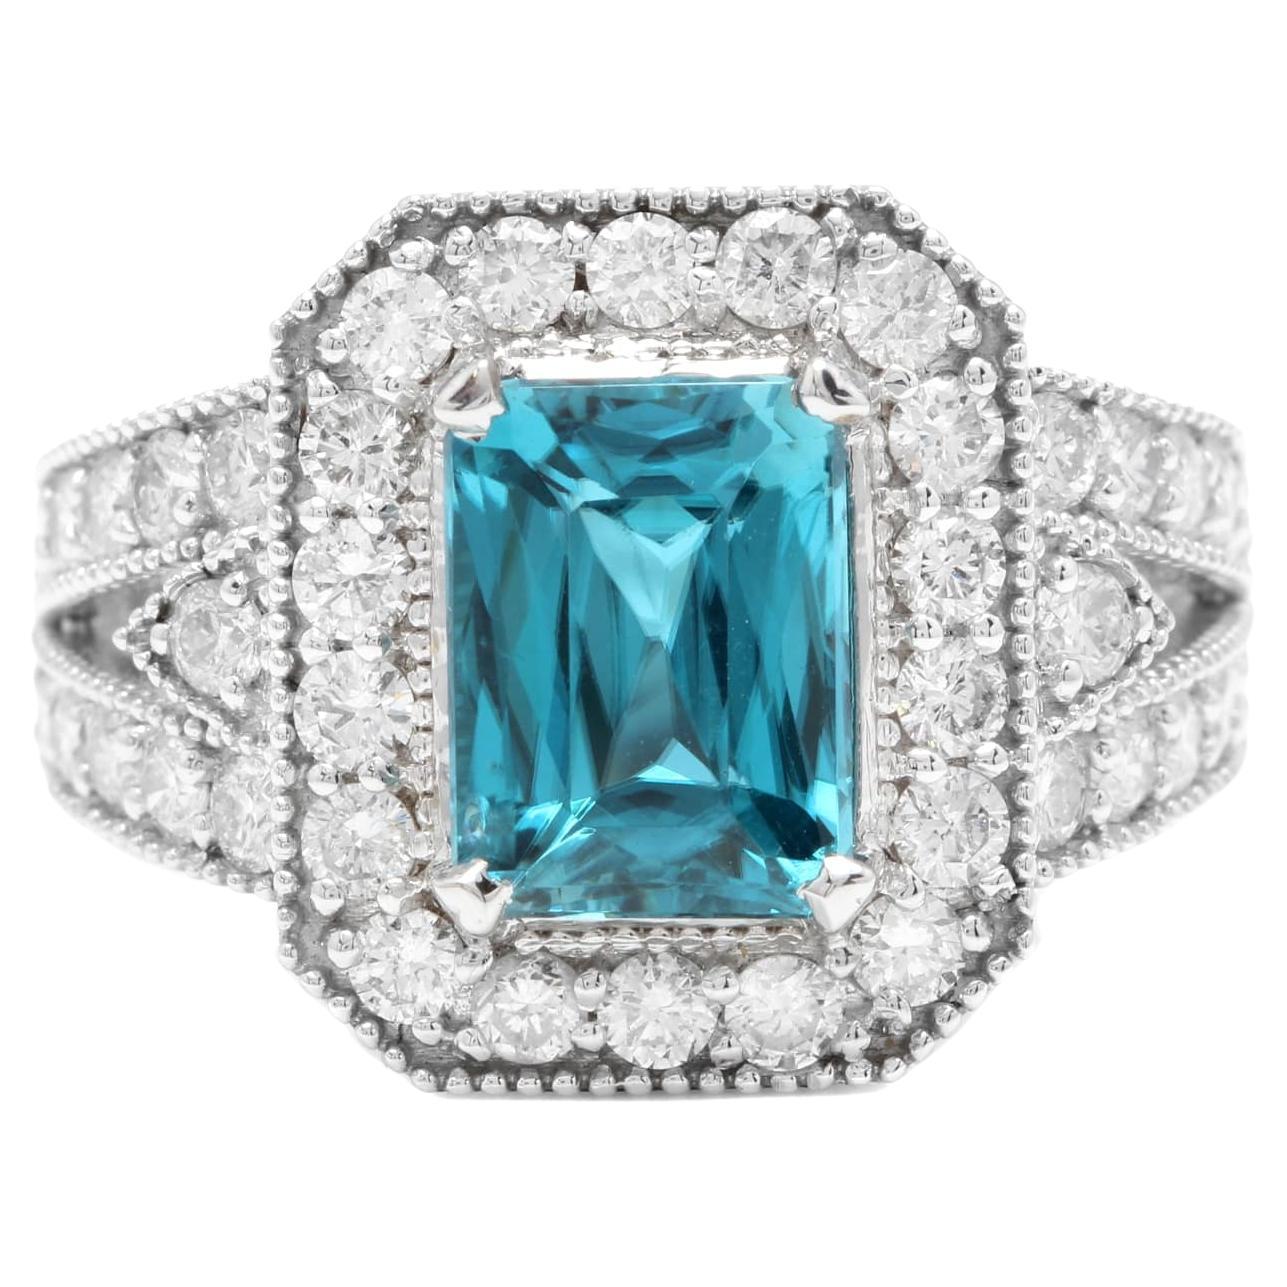 5.95 Ct Natural Nice Looking Blue Zircon and Diamond 14K Solid White Gold Ring